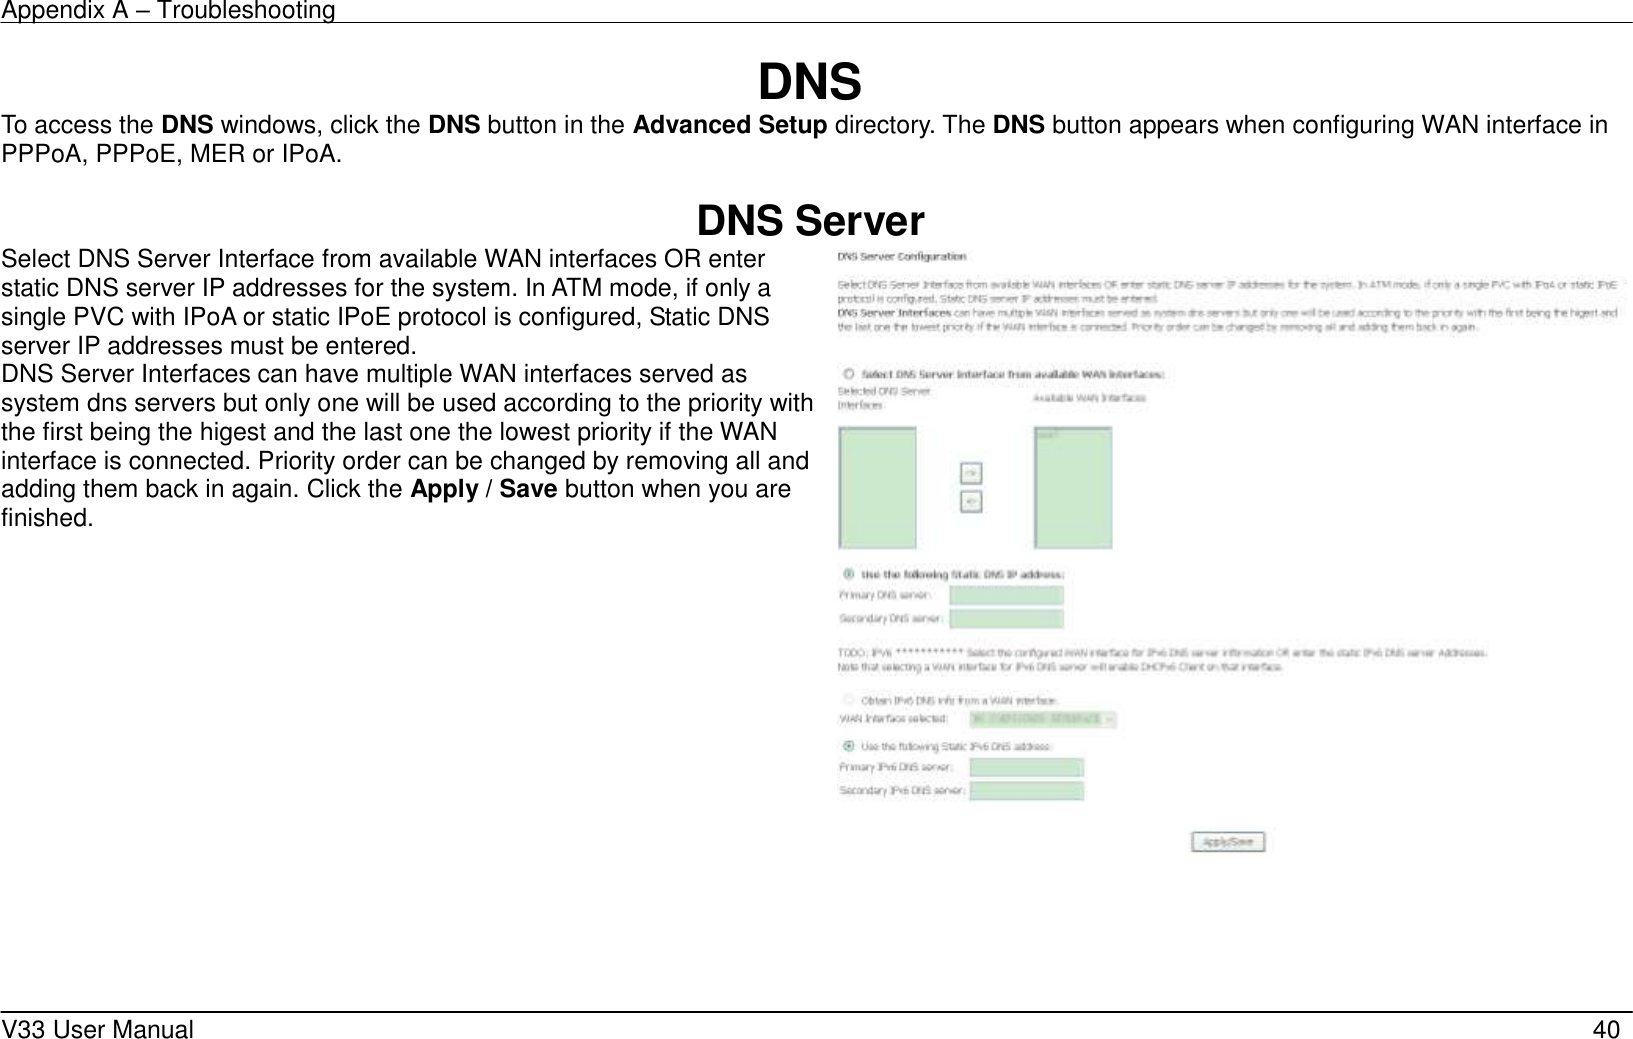 Appendix A – Troubleshooting    V33 User Manual   40 DNS To access the DNS windows, click the DNS button in the Advanced Setup directory. The DNS button appears when configuring WAN interface in PPPoA, PPPoE, MER or IPoA.  DNS Server Select DNS Server Interface from available WAN interfaces OR enter static DNS server IP addresses for the system. In ATM mode, if only a single PVC with IPoA or static IPoE protocol is configured, Static DNS server IP addresses must be entered. DNS Server Interfaces can have multiple WAN interfaces served as system dns servers but only one will be used according to the priority with the first being the higest and the last one the lowest priority if the WAN interface is connected. Priority order can be changed by removing all and adding them back in again. Click the Apply / Save button when you are finished.        